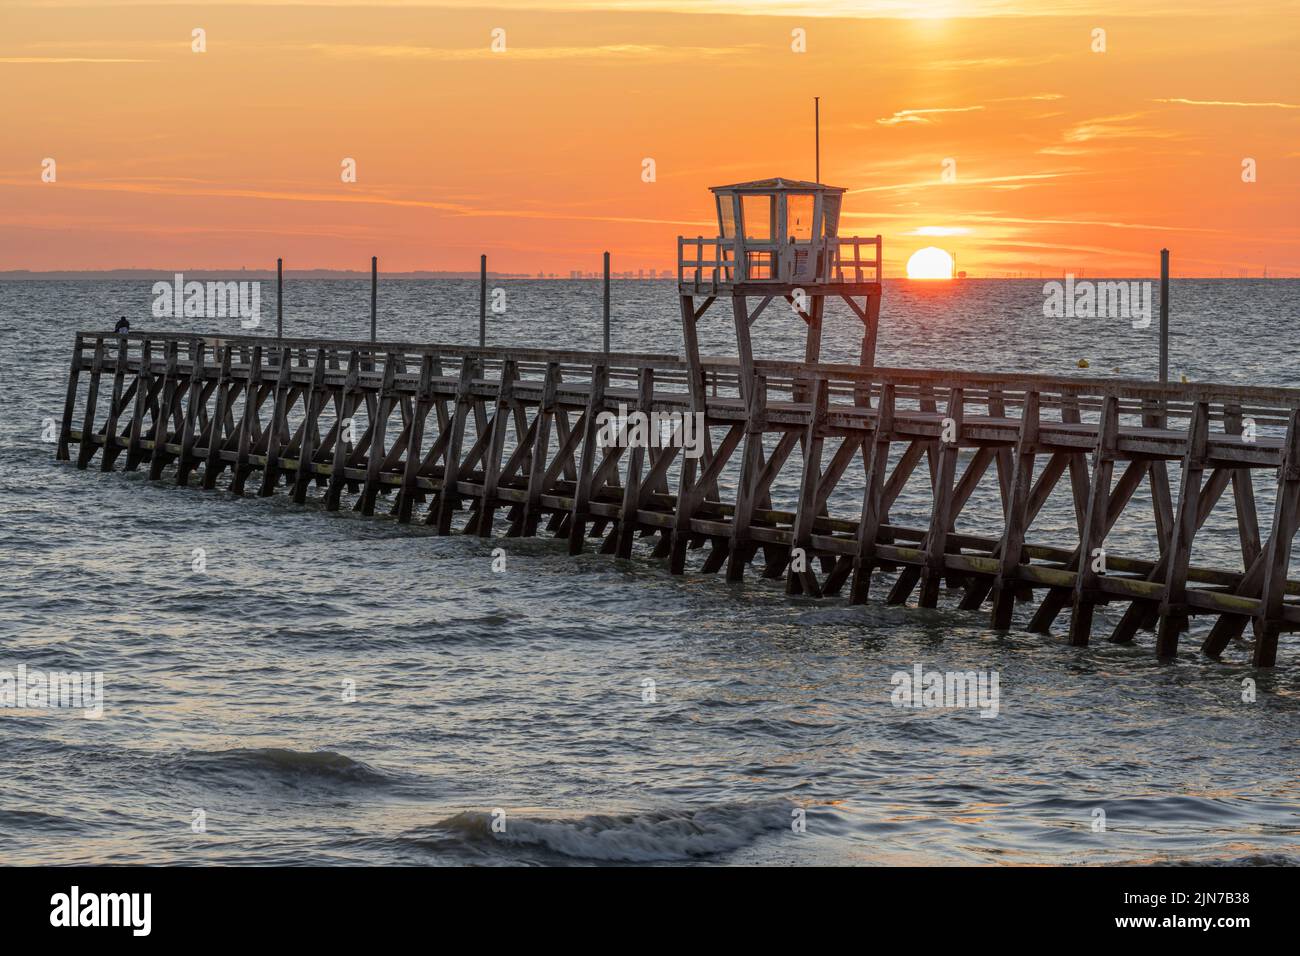 View of a wooden pier in front of the sea, a colorful sunrise and Le Havre city buildings far away Stock Photo